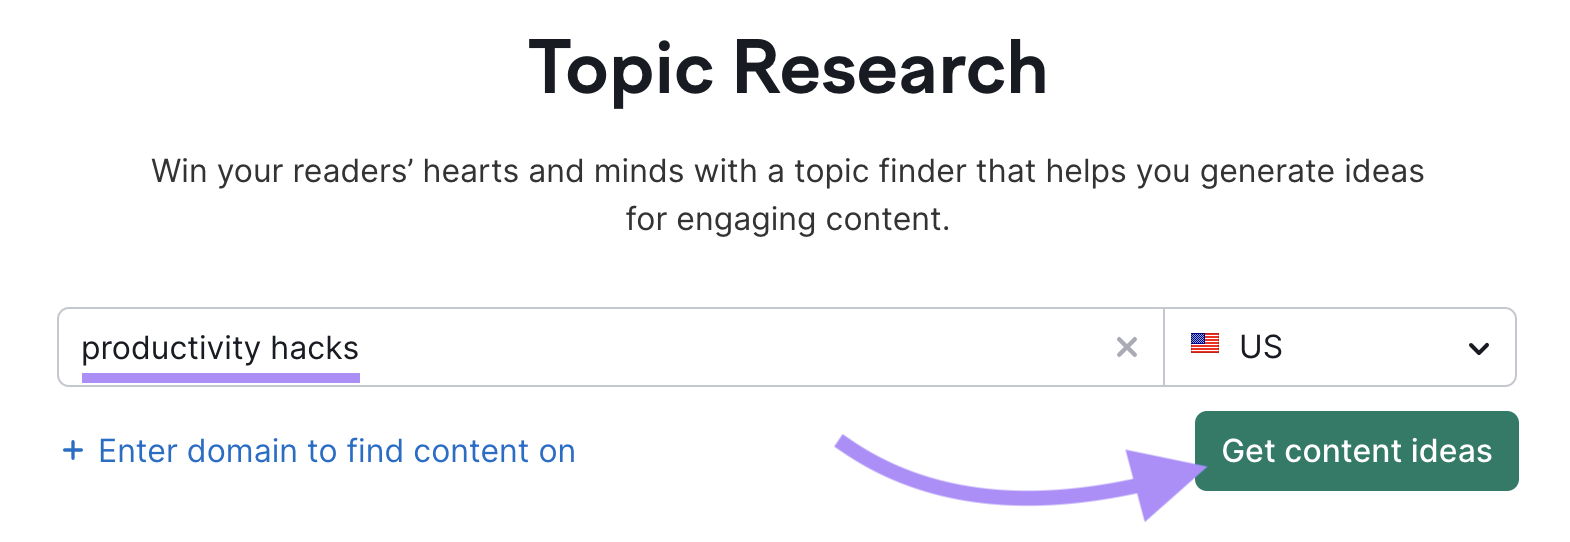 "productivity hacks" entered into the Topic Research tool search bar